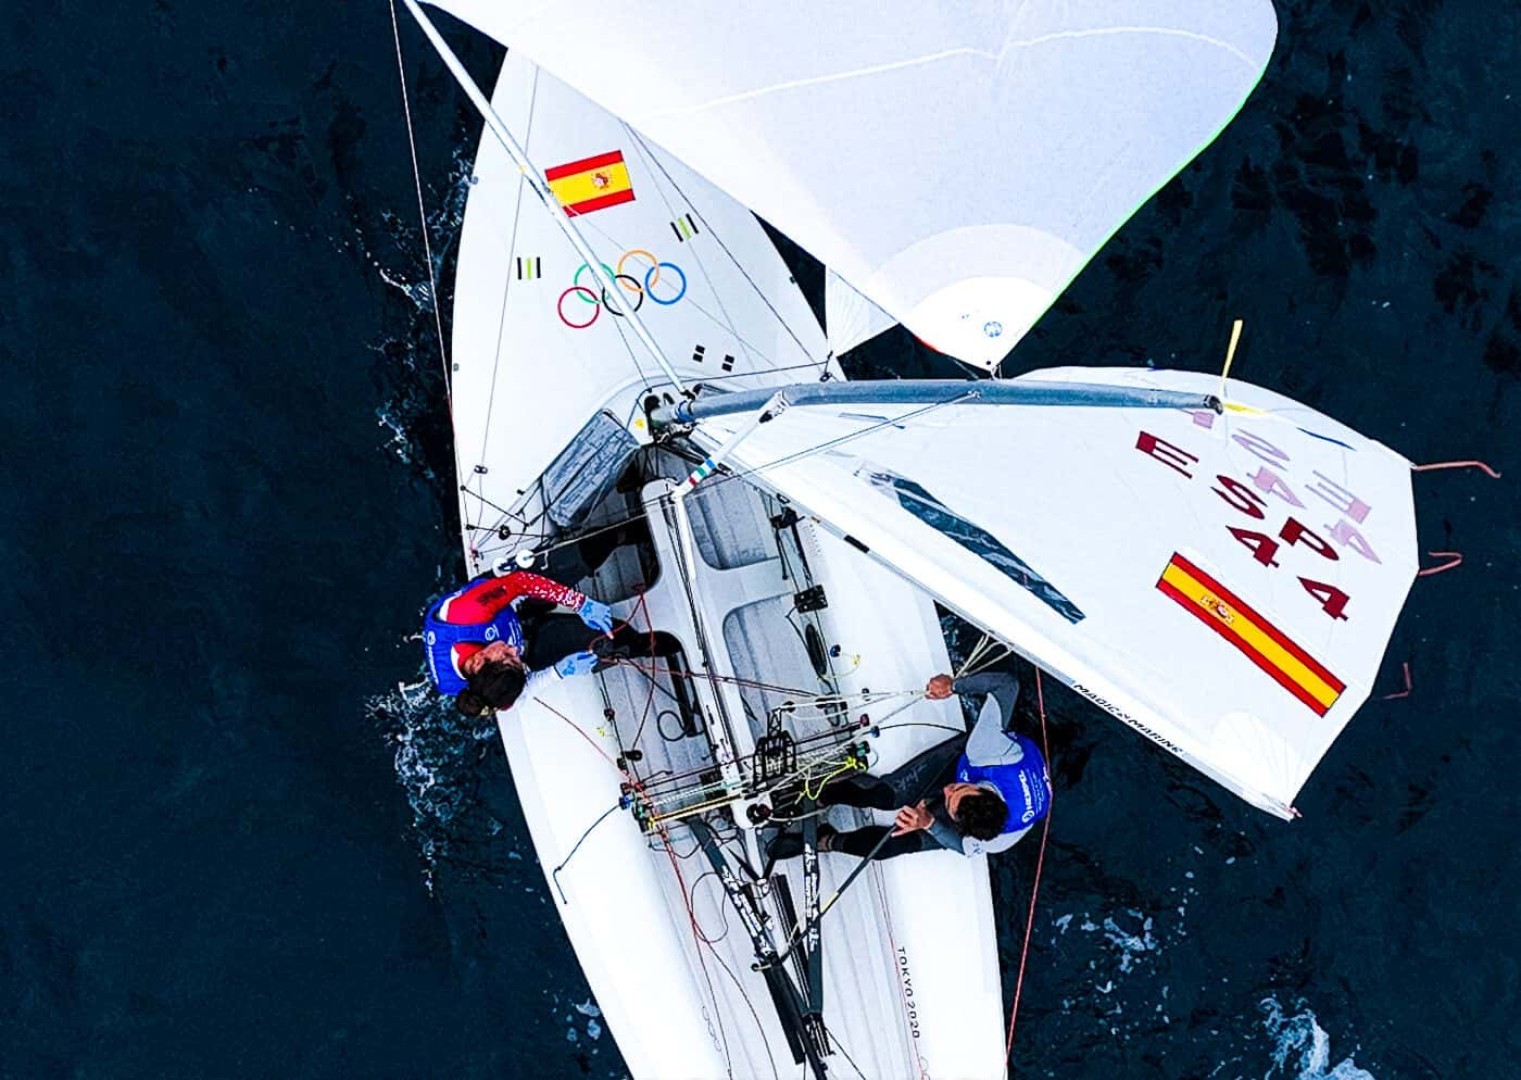 Hempel World Cup Series at
the Princess Sofía Regatta
-
Change of
Weather Means
New Challenges